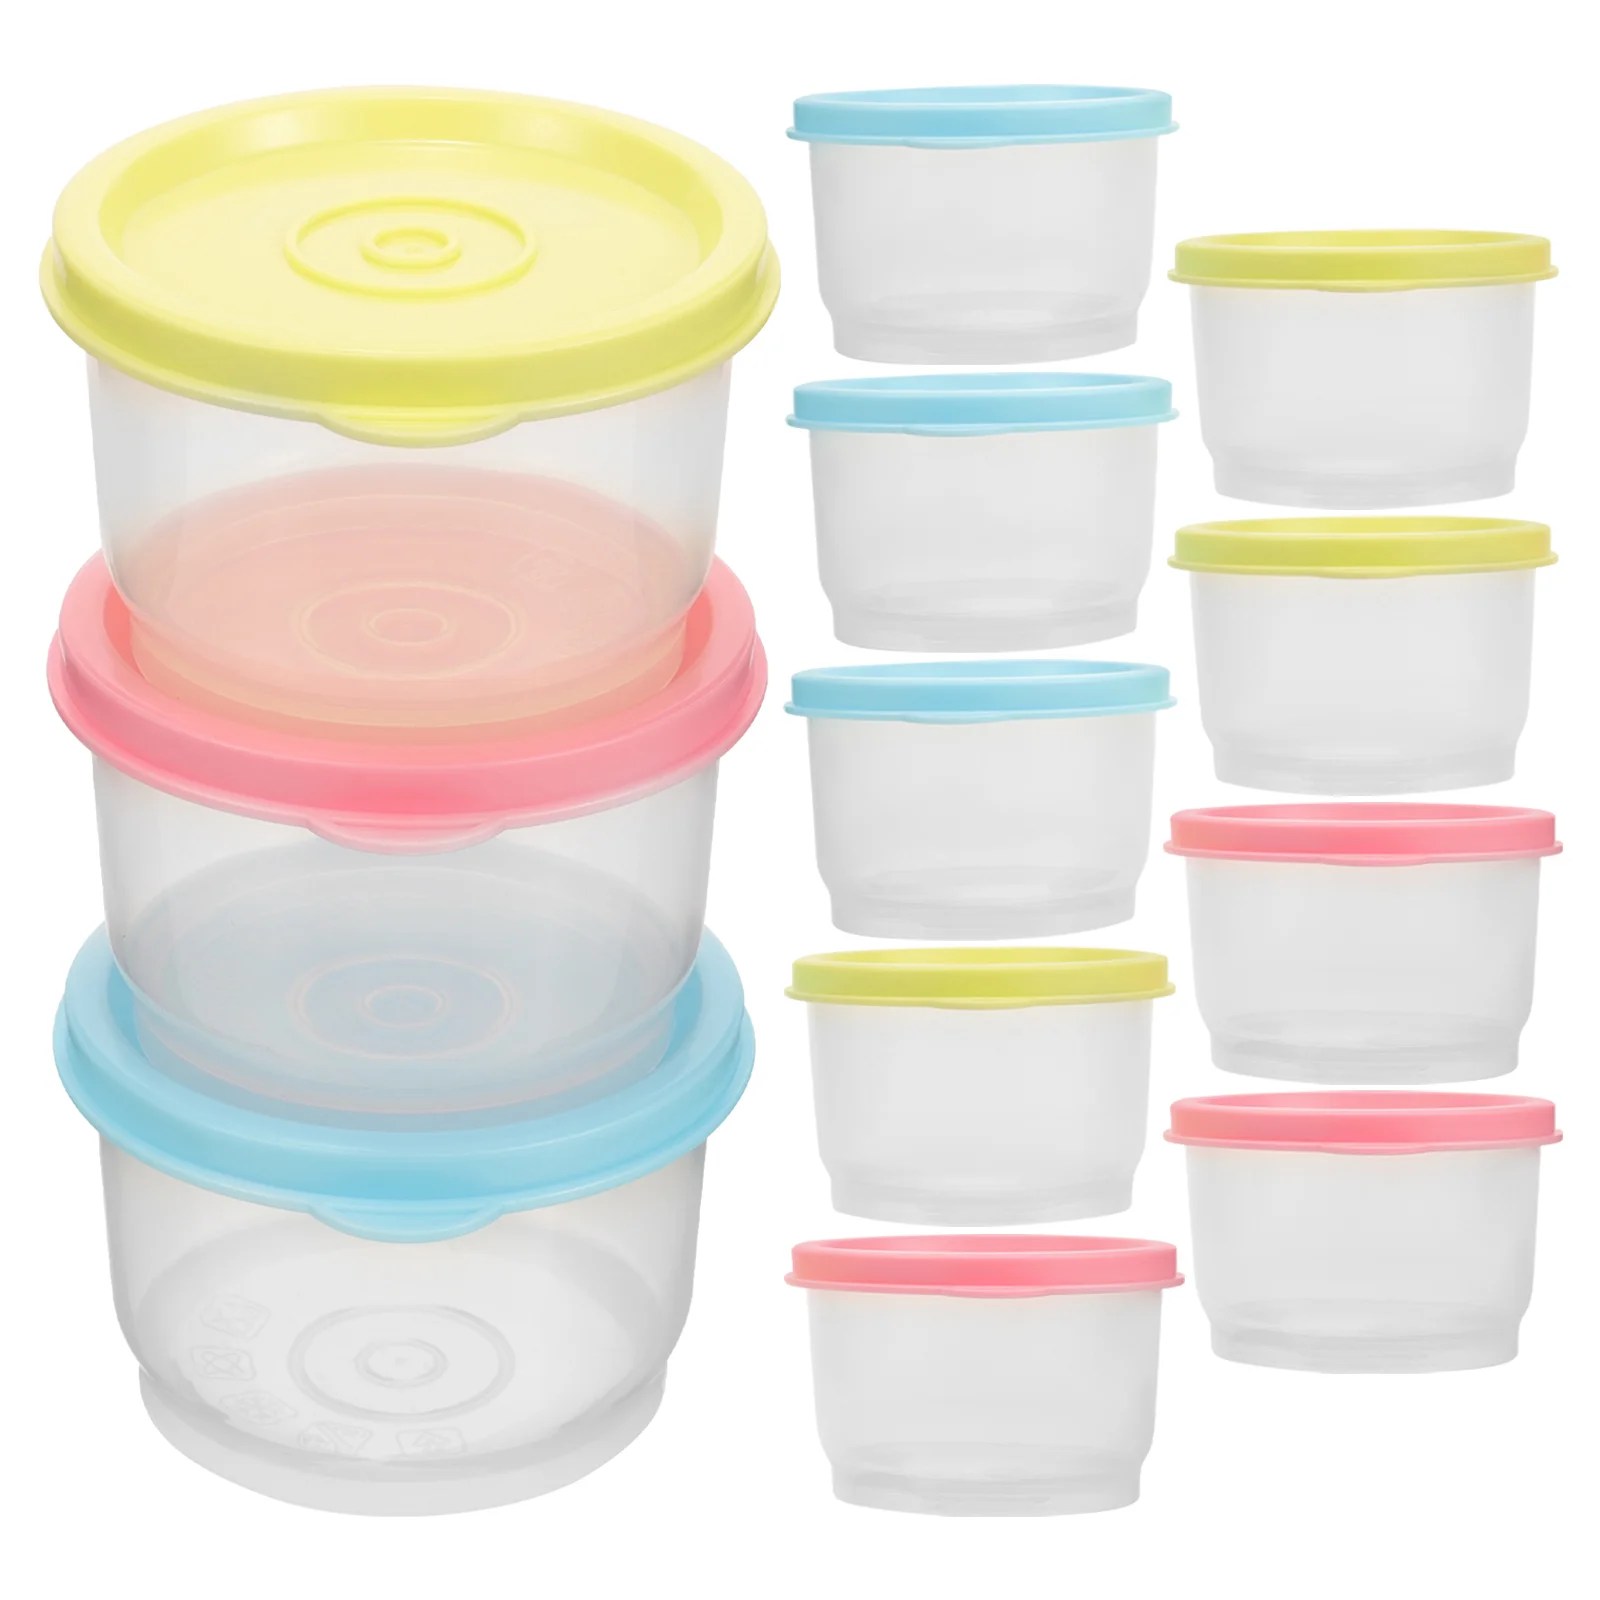 

Kitchen Food Storage Box Food Container Plastic Bento Crisper Food Preservation Mini Microwave Oven Bowl For Baby Kids